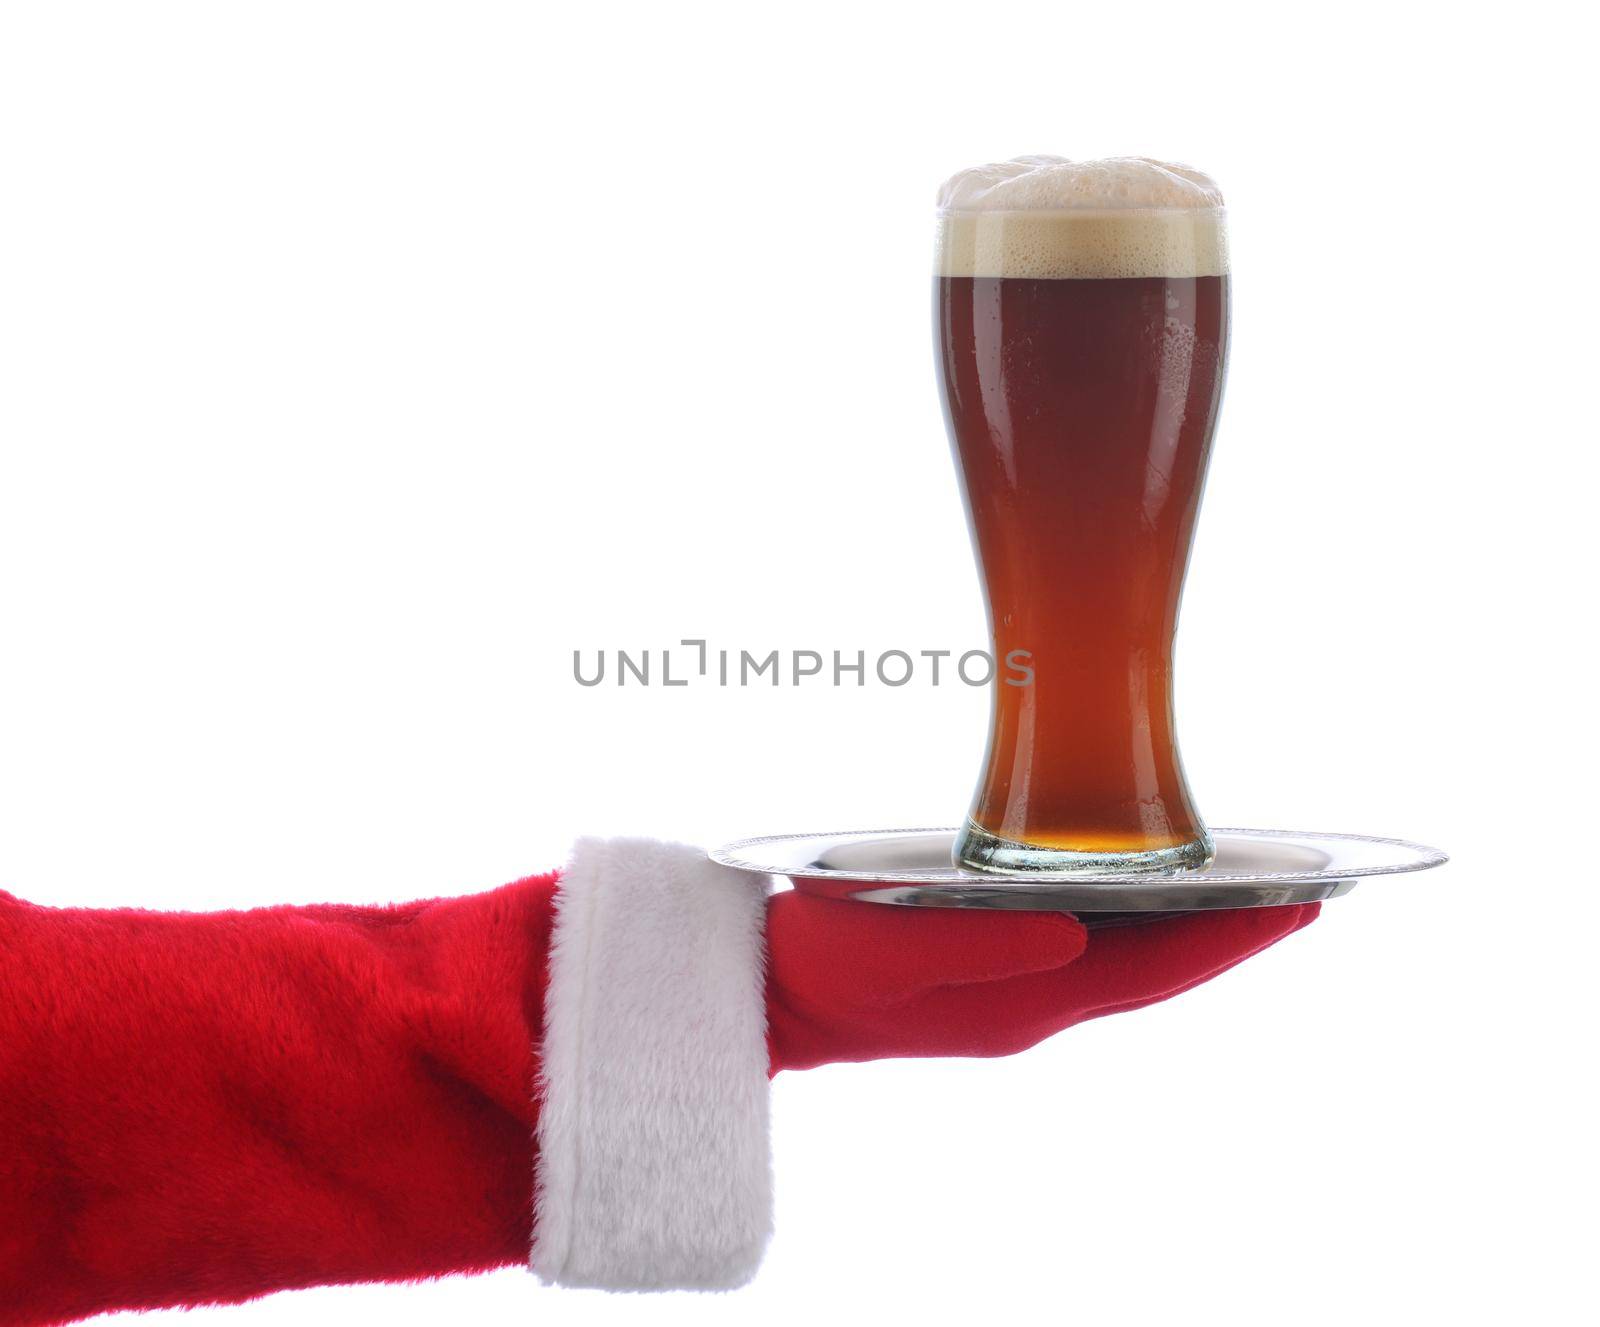 Santa Claus holding a serving tray with a glass of beer over a white background.